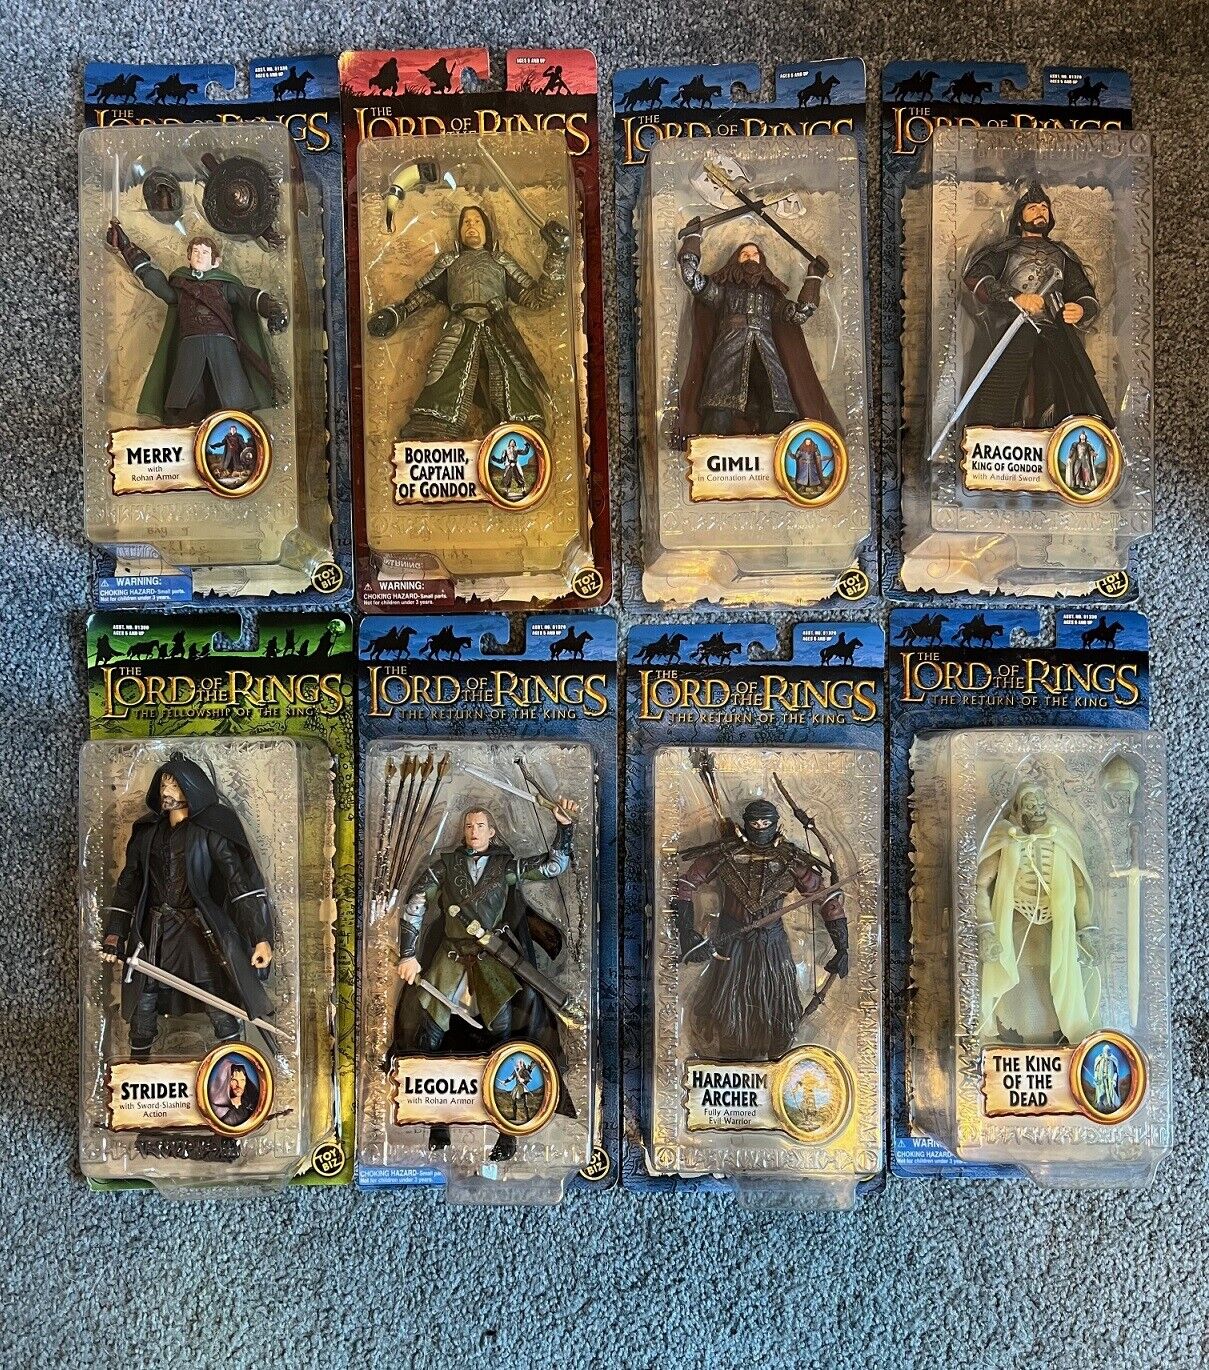 Lord of the Rings Action Figure LOT - 8 Items - Aragorn/Gimli/Legolas +More NEW